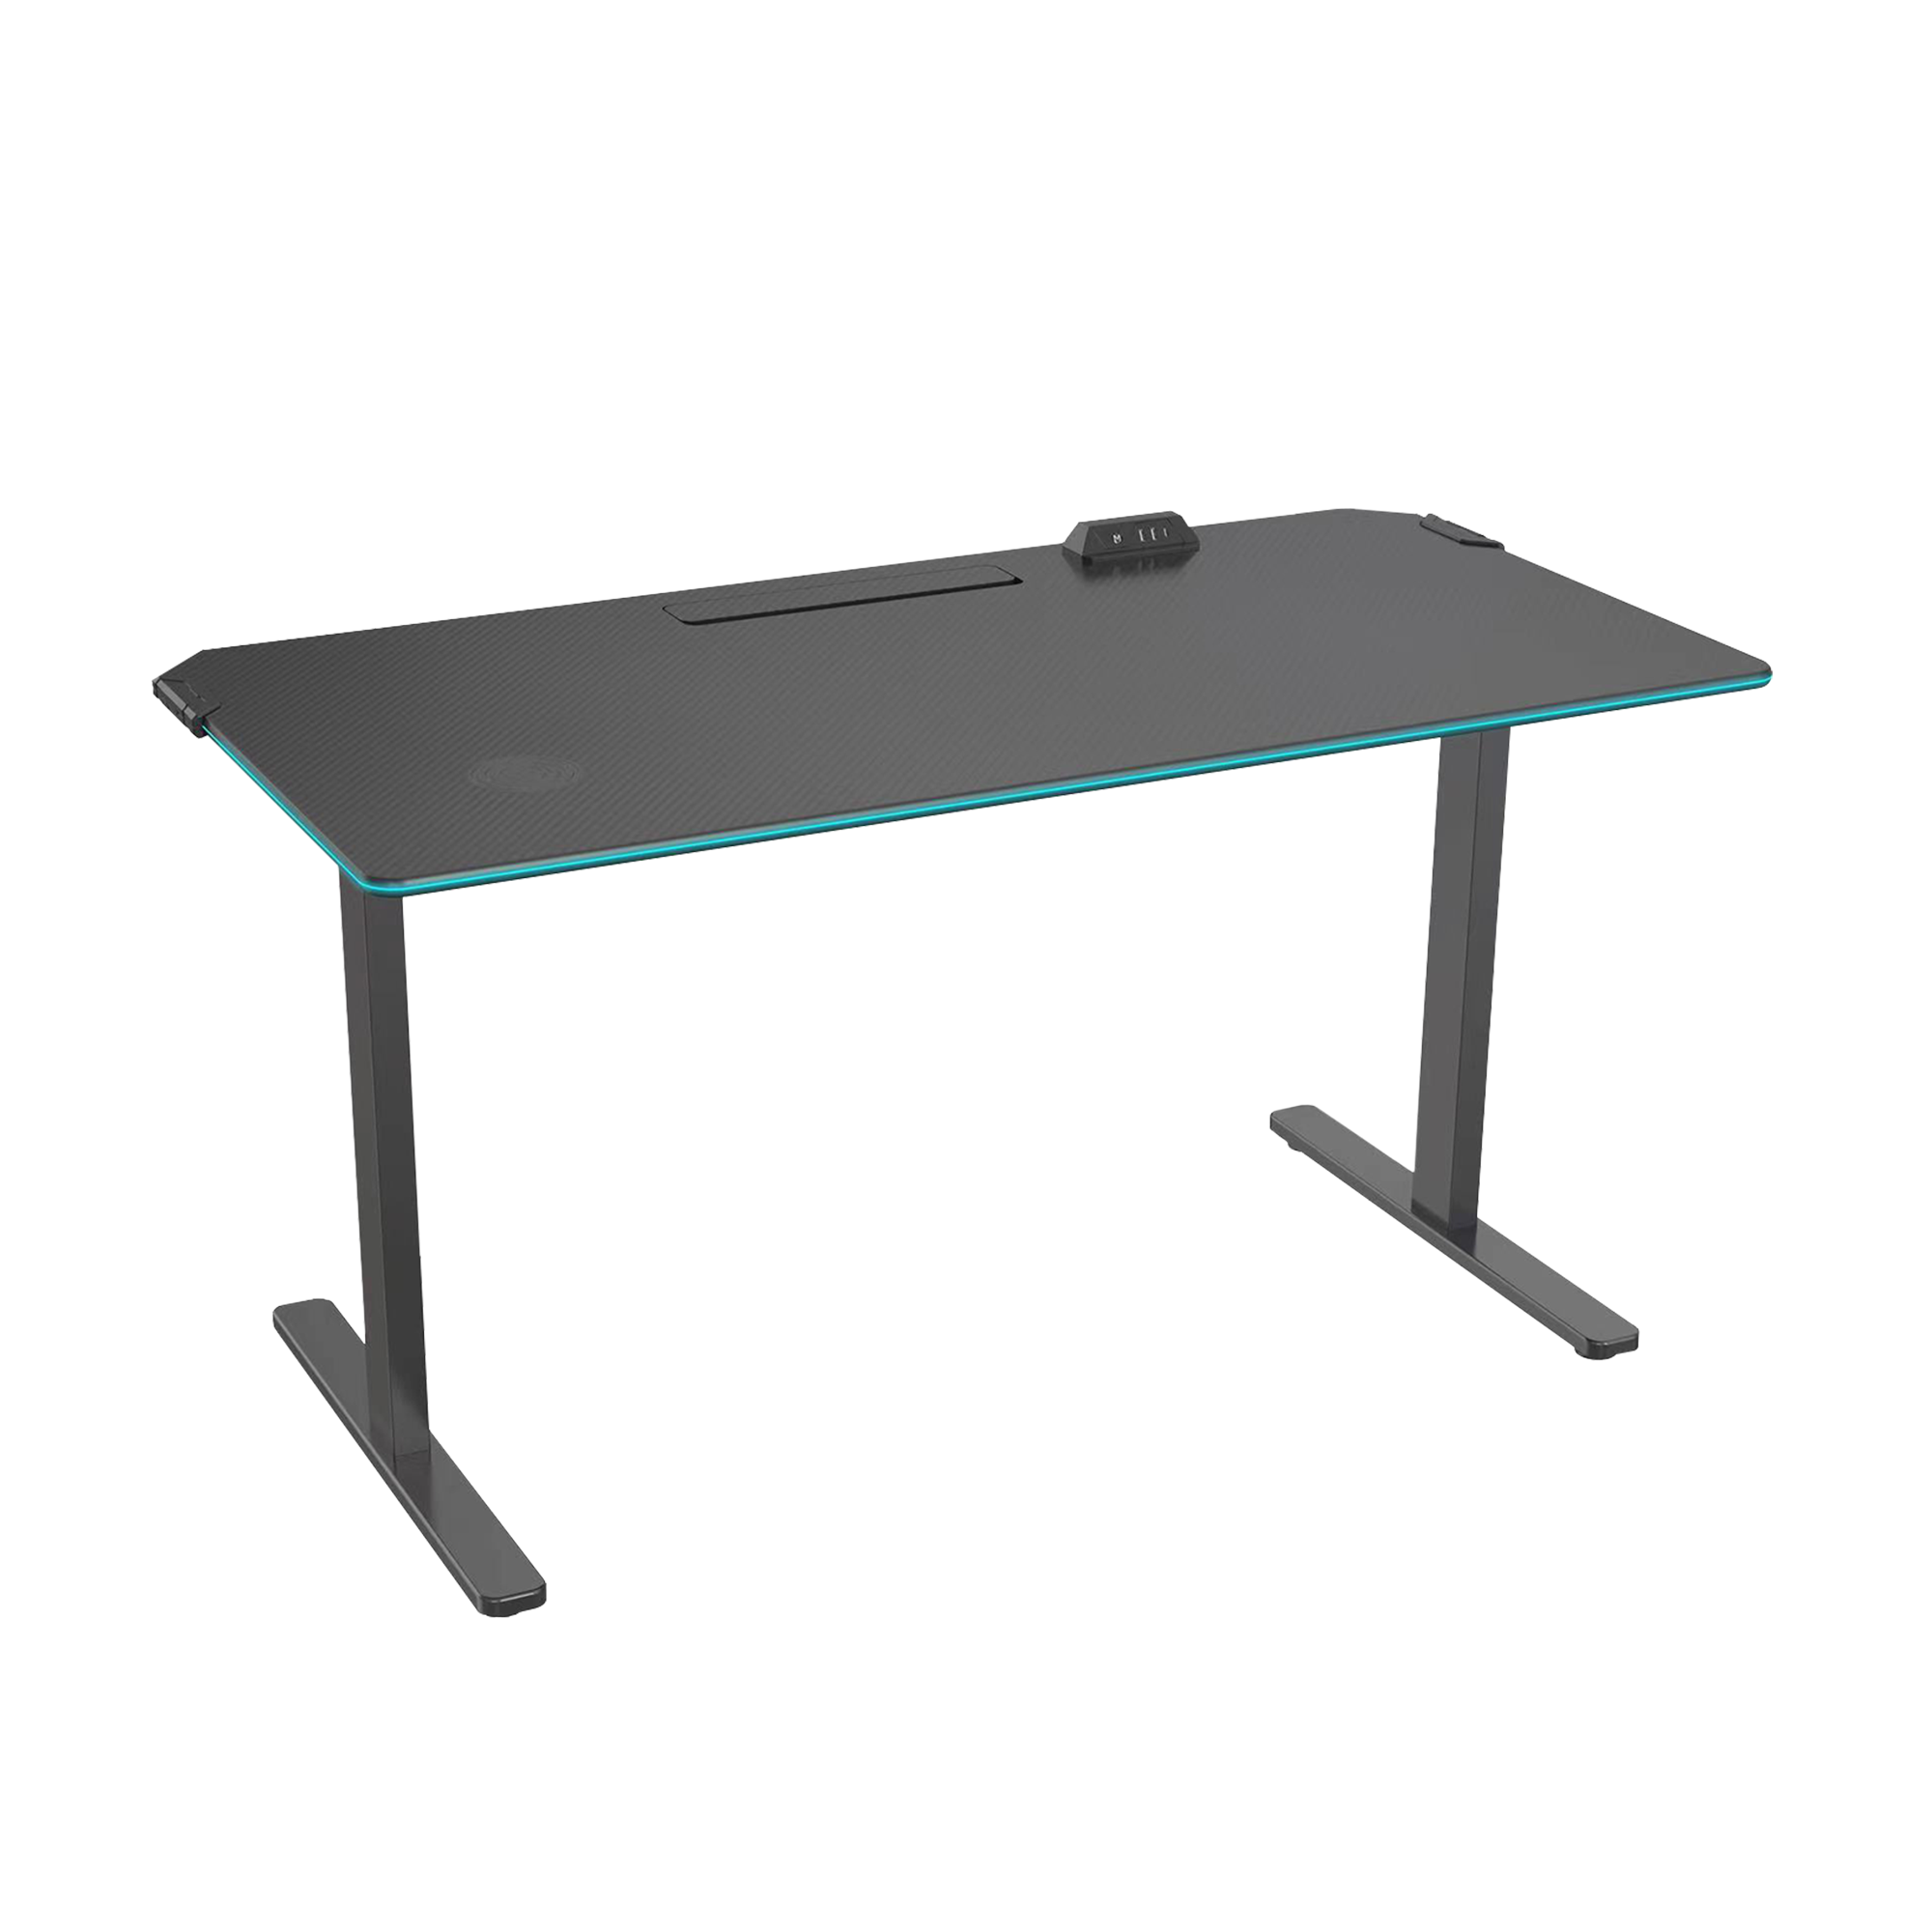 Noble Desk Duke Series - Rounded Edge Plain Table Top (Indicate Table Top Color During Checkout)